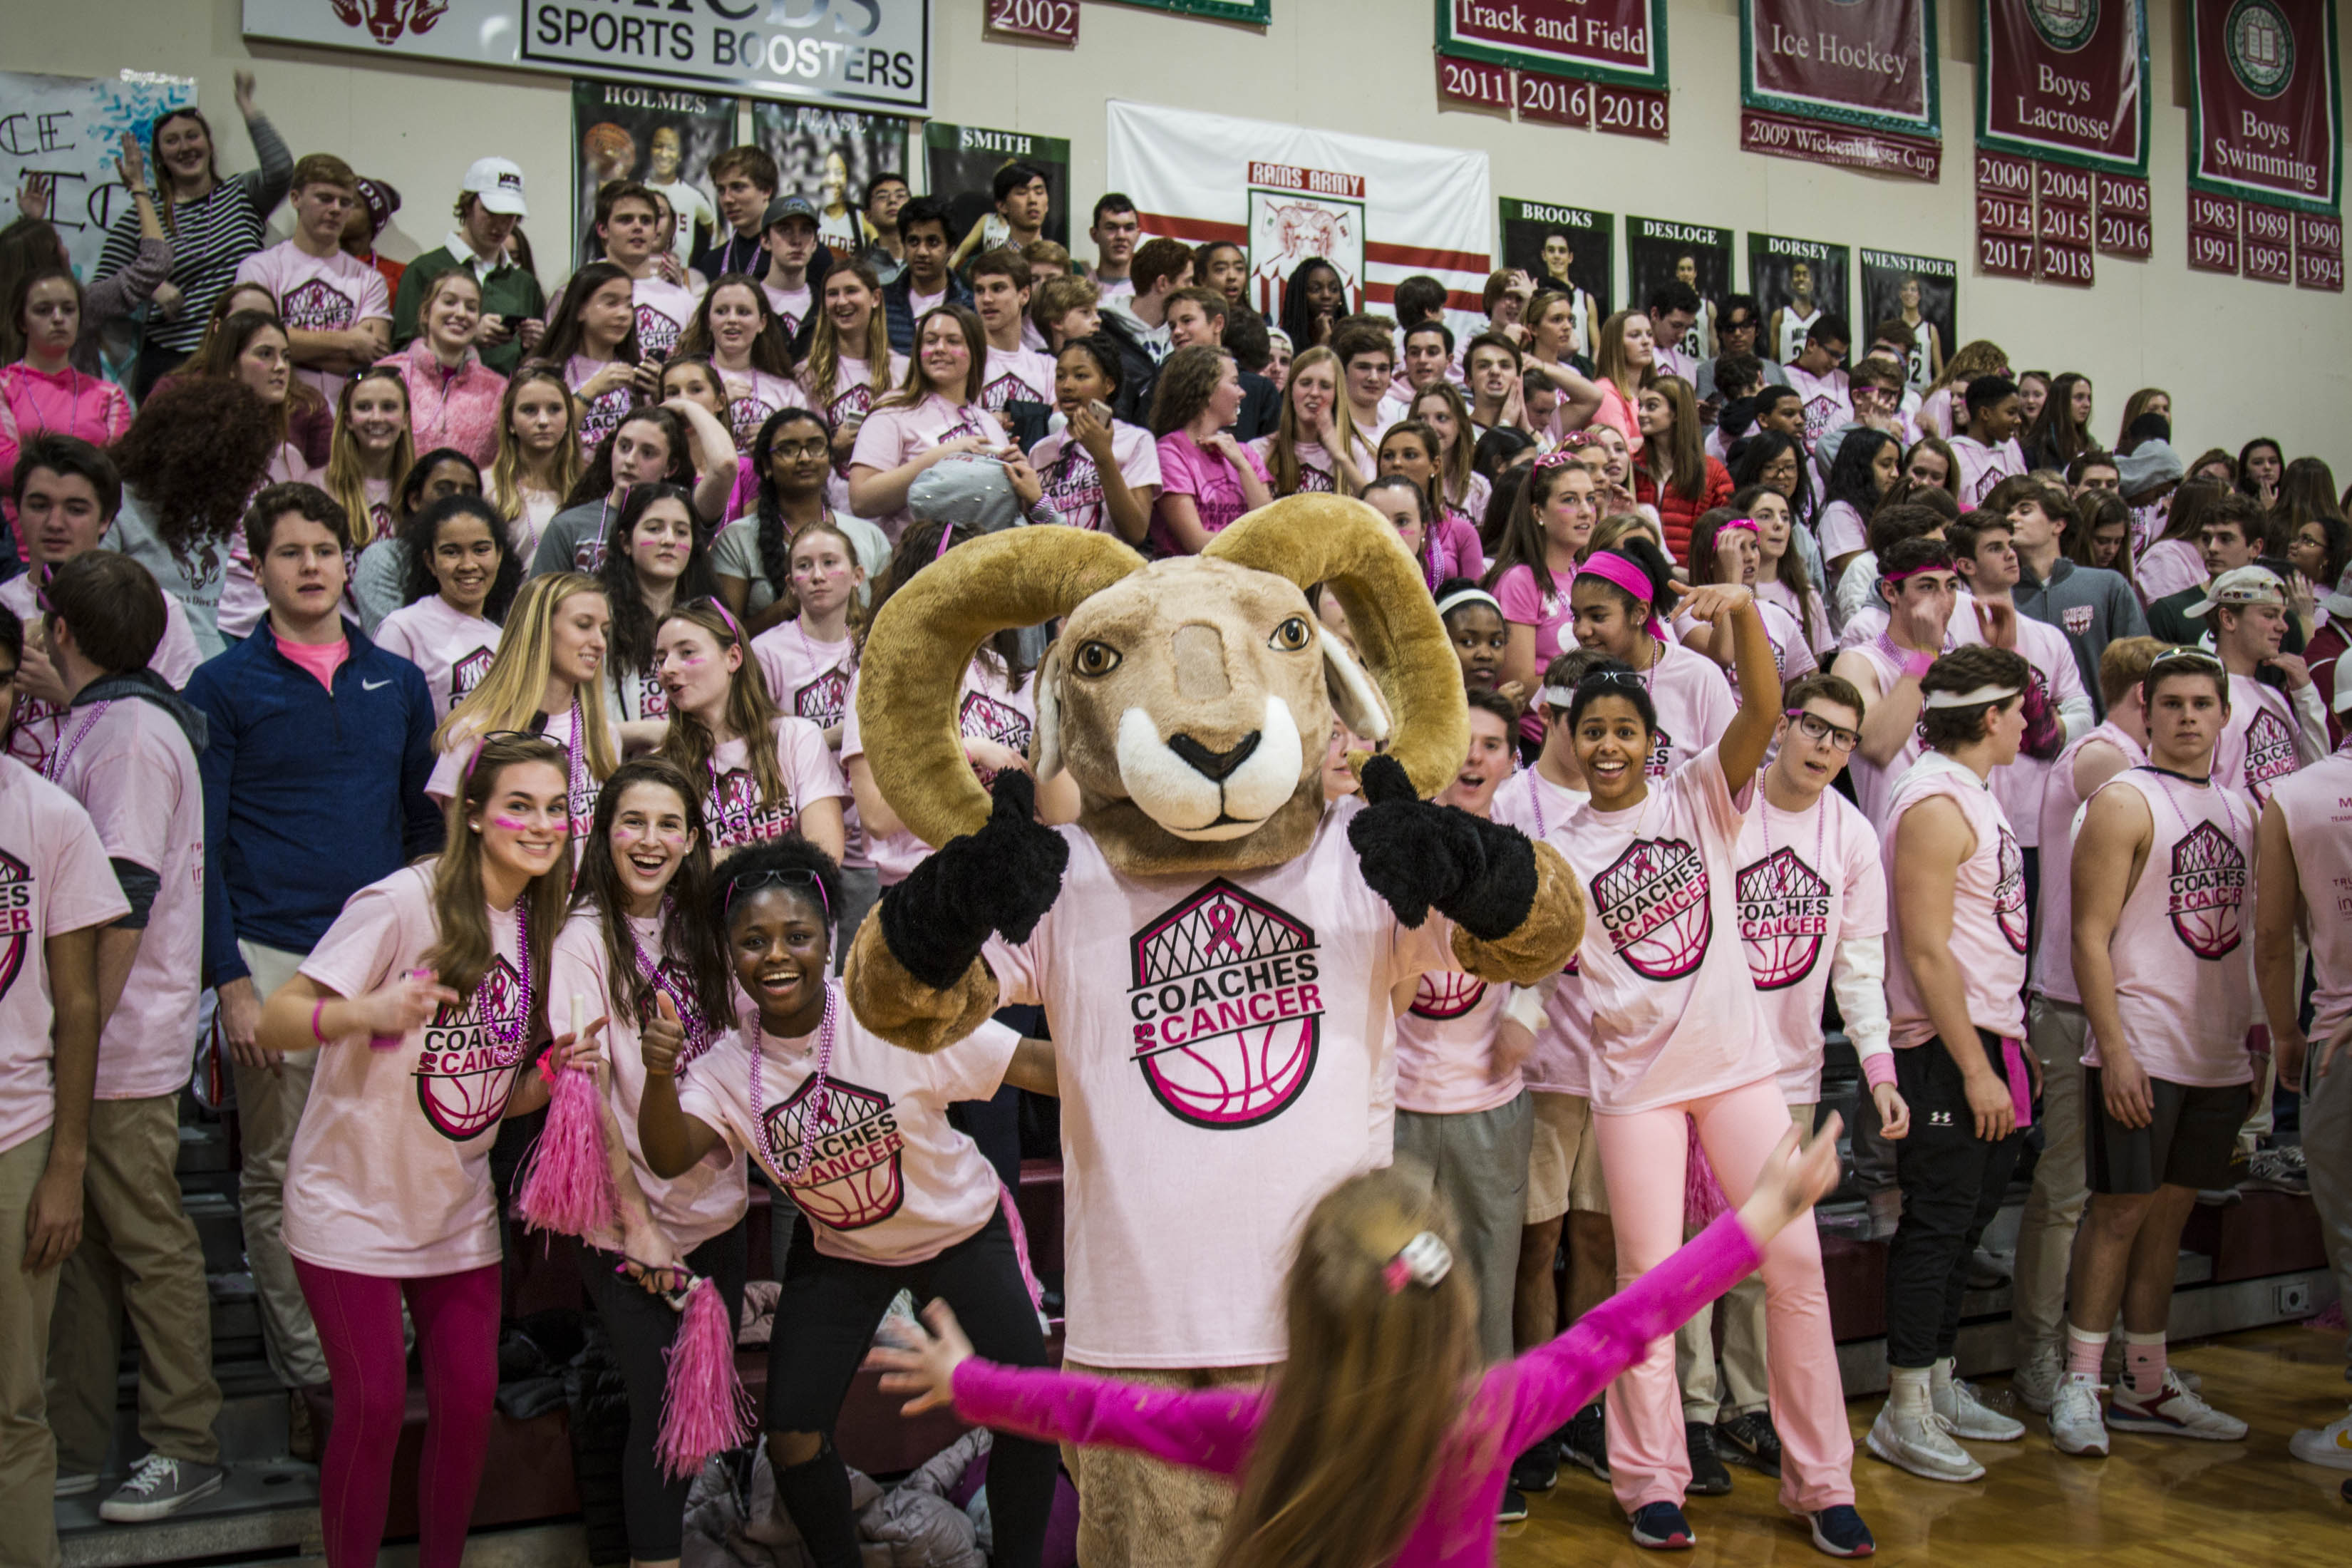 Coaches vs. Cancer basketball games to benefit American Cancer Society